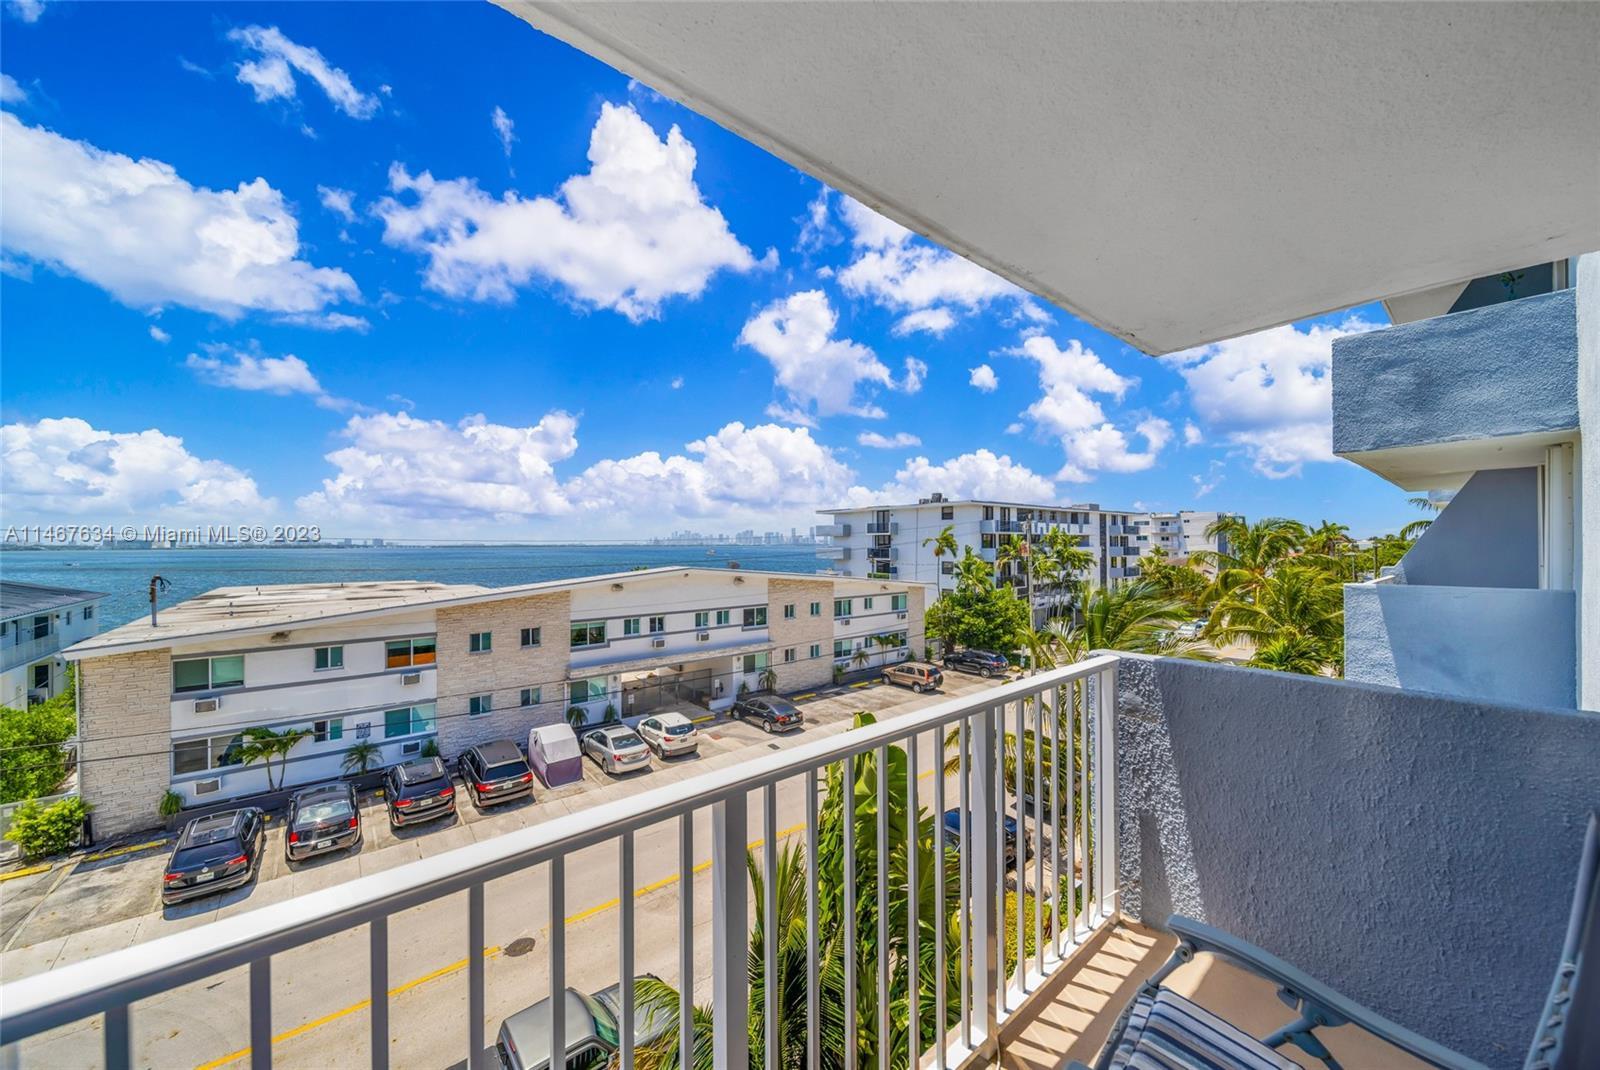 Chic and cozy one-bedroom condo located in the well-known North Bay Village!!! This condo features p